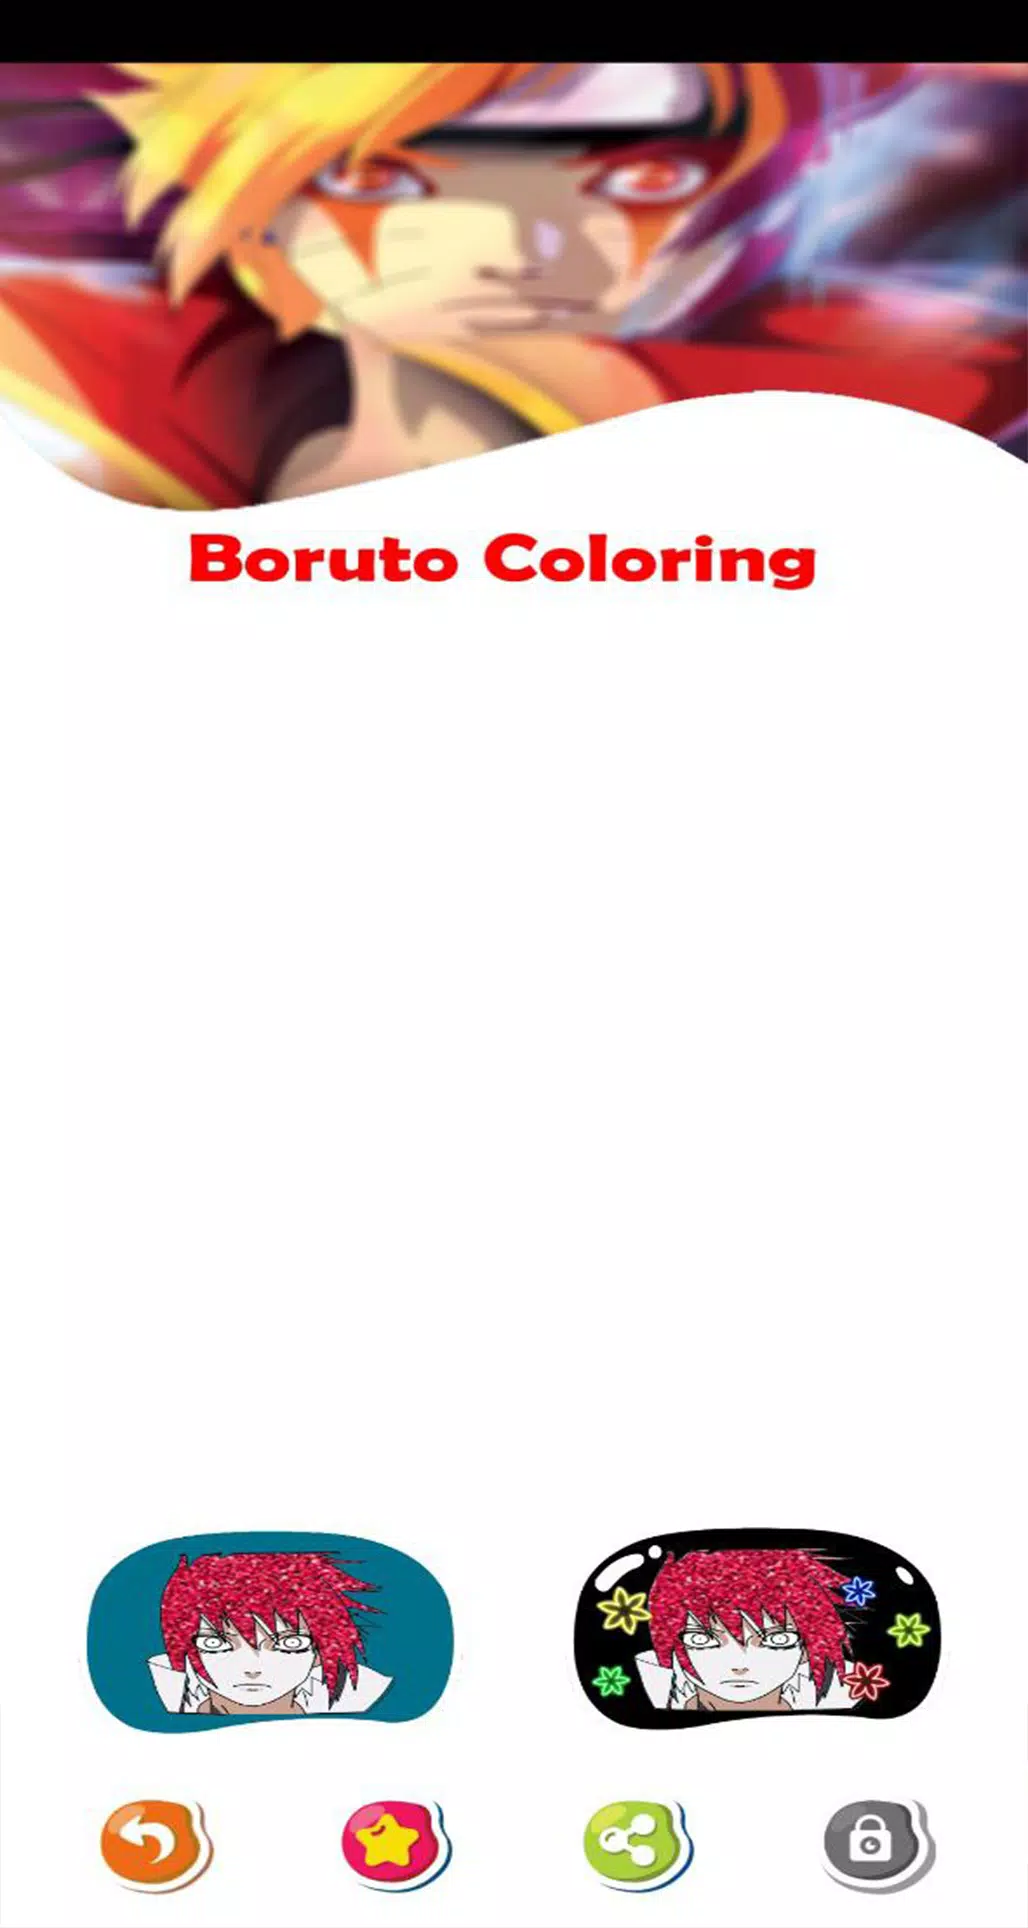 Boruto Uzumaki Coloring Page  Boruto, Coloring pages, Coloring pages for  kids